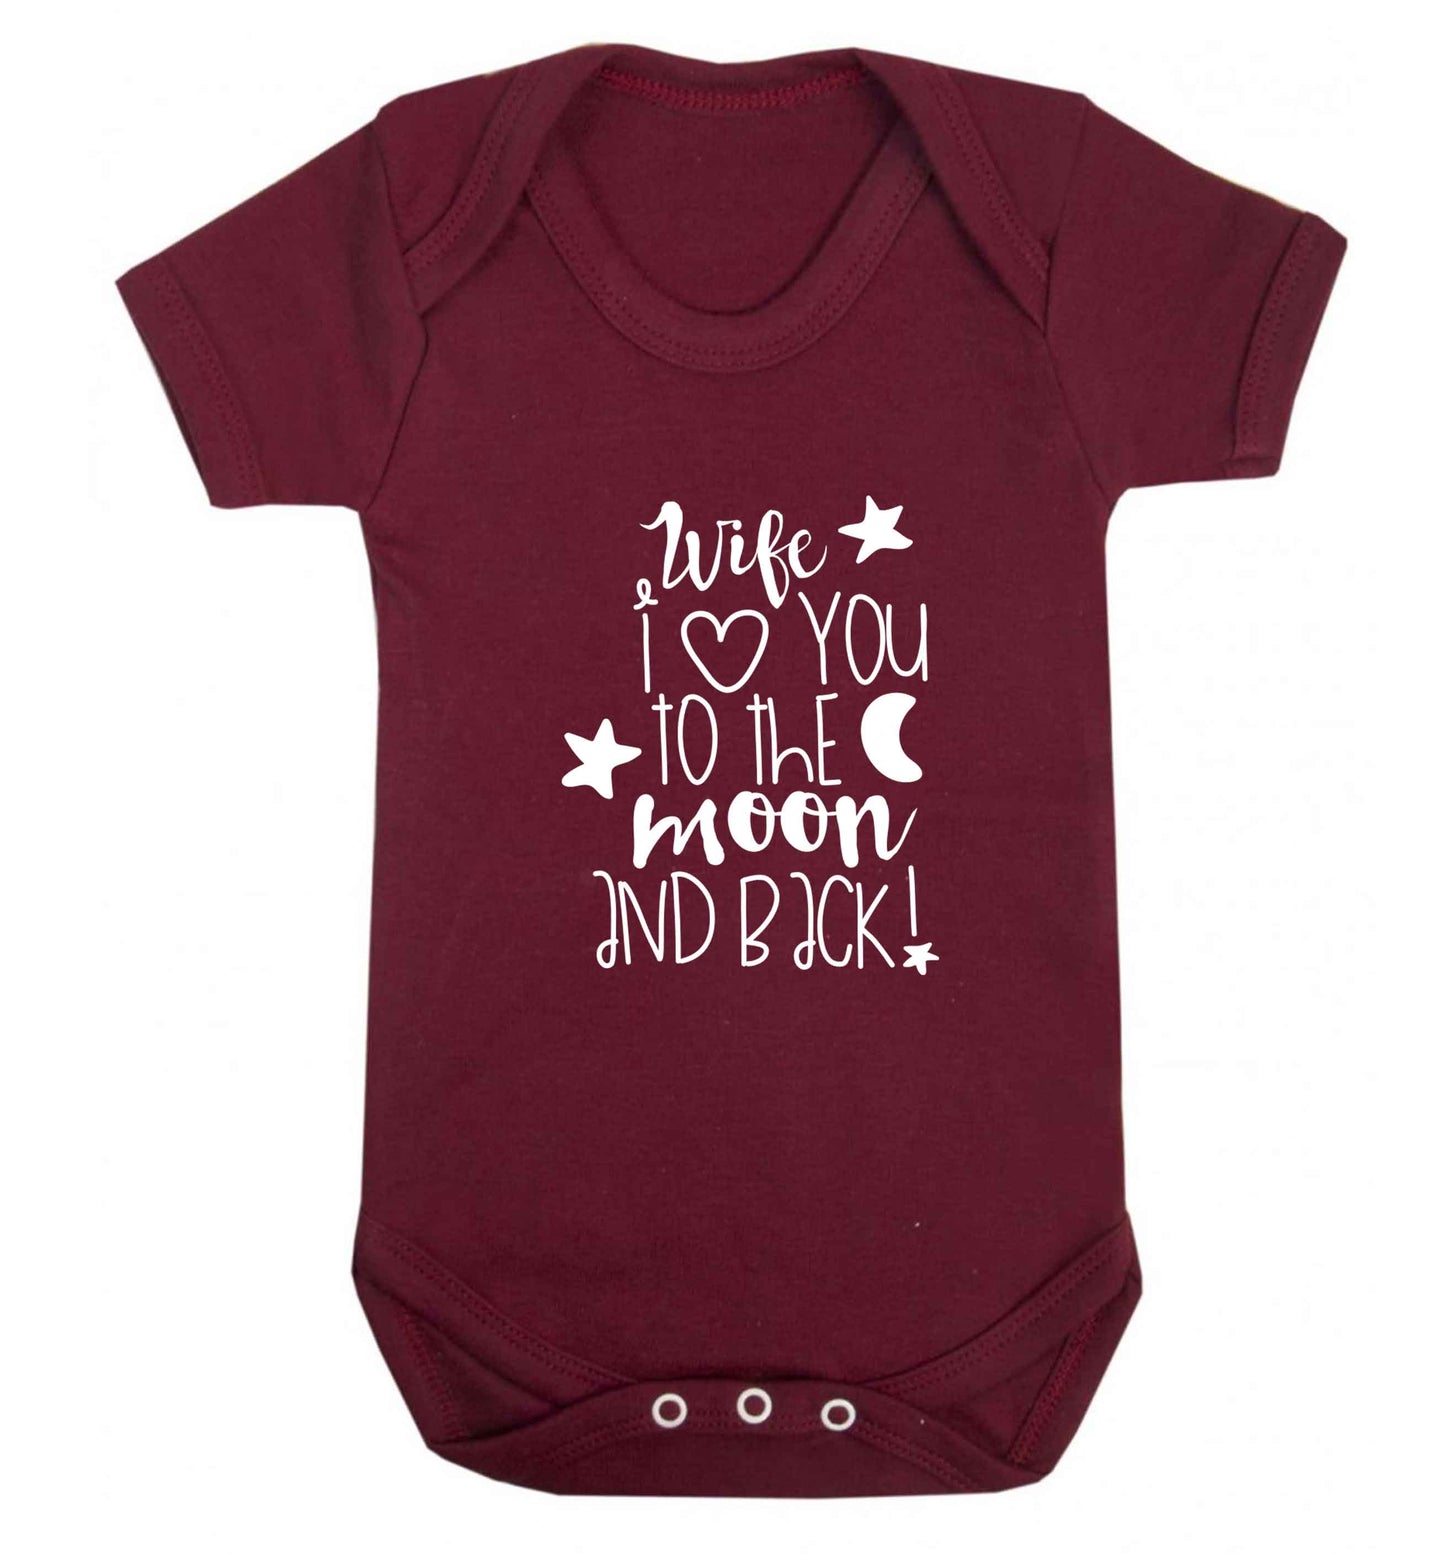 Wife I love you to the moon and back baby vest maroon 18-24 months